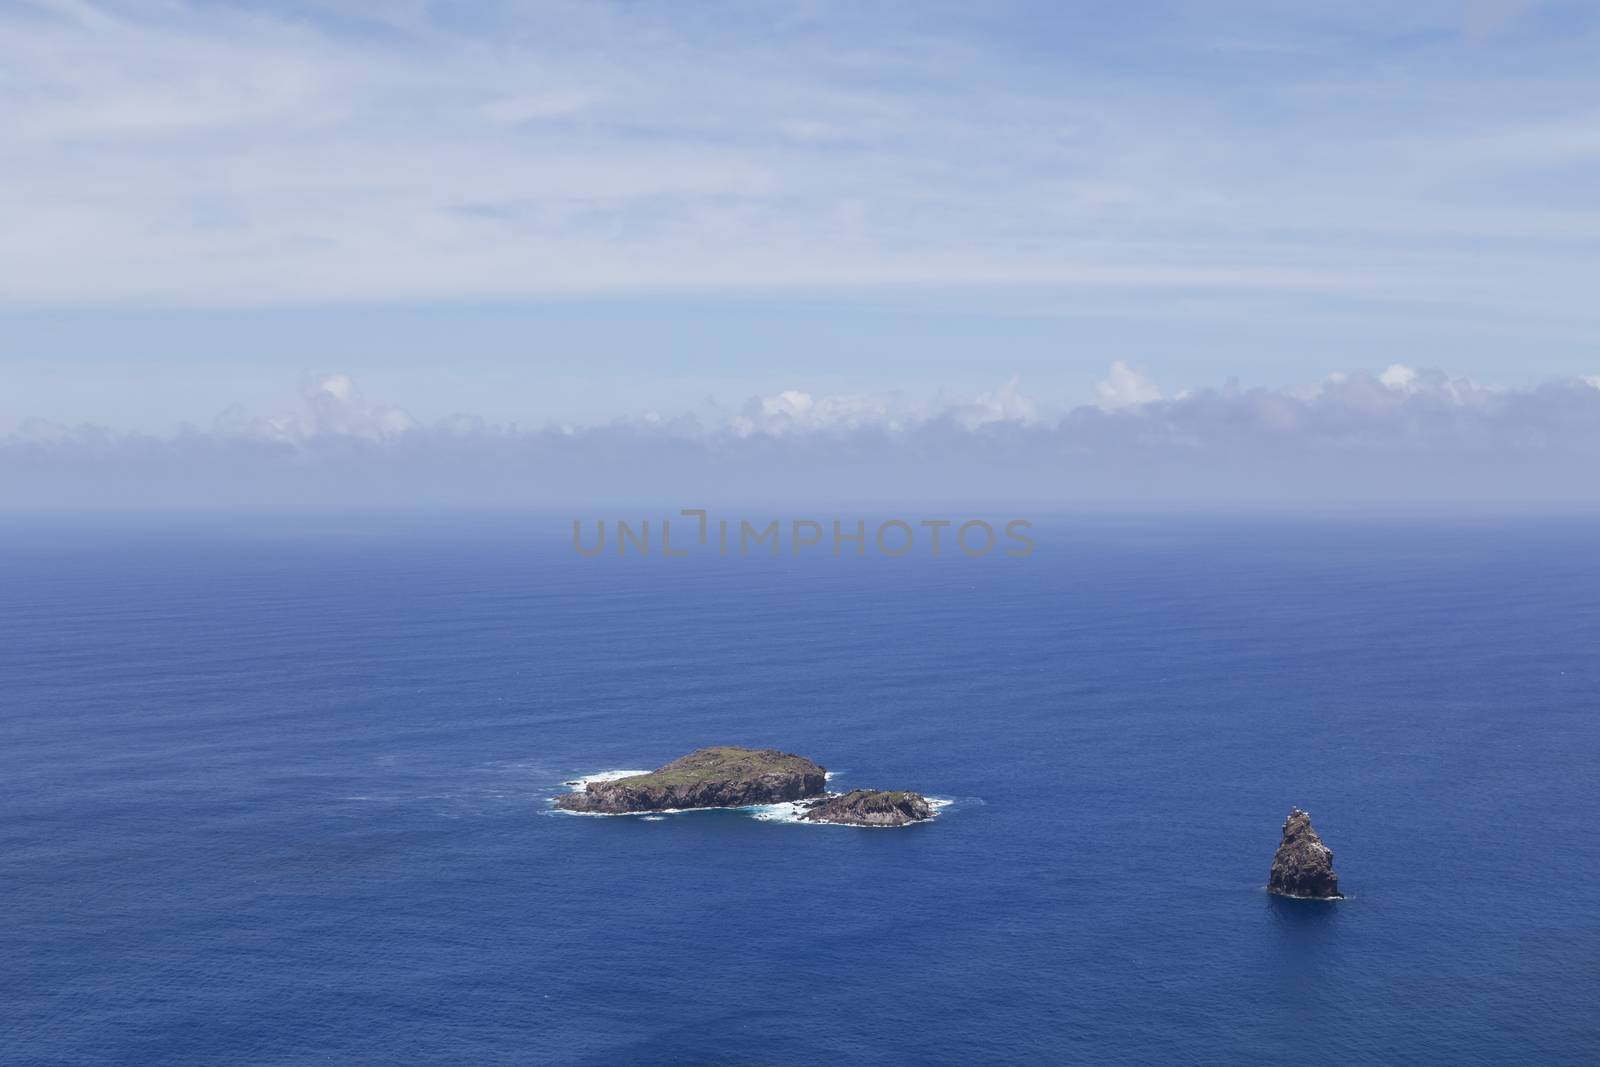 Photograph of the Birdman Islands in front of Easter Island